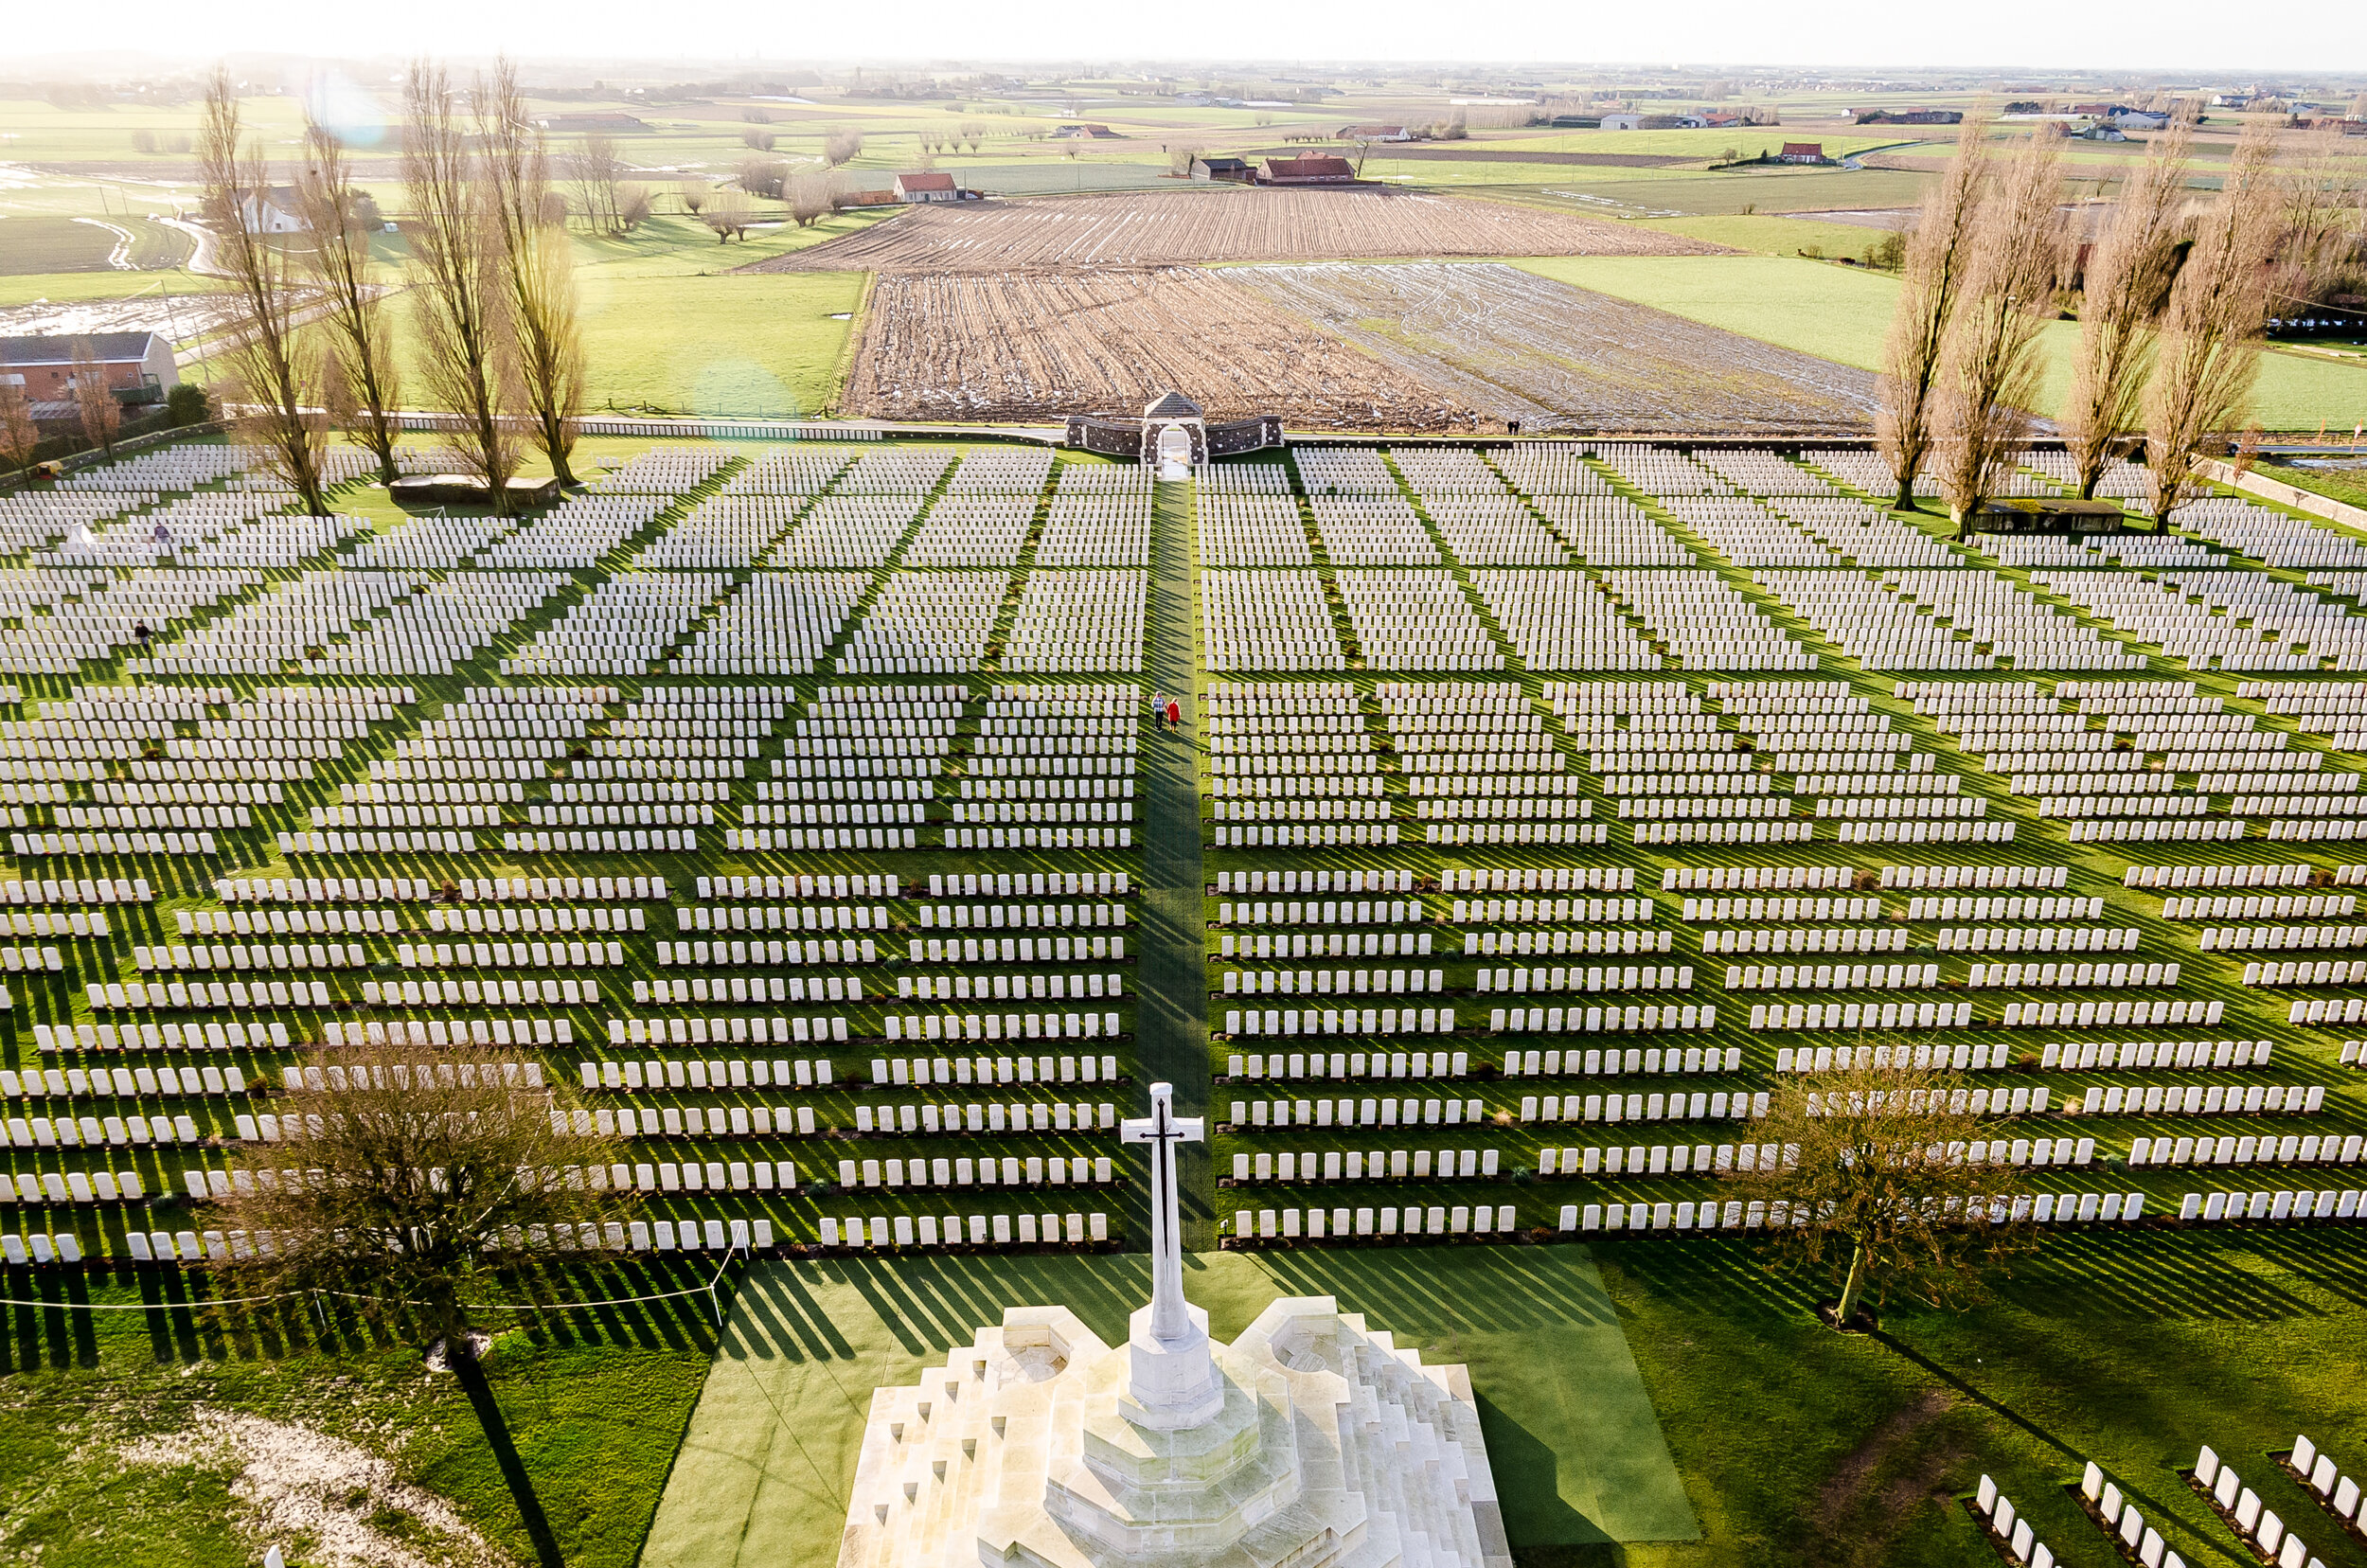 14_01_16_GUERRE1418_SOIRMAG. YPRES. AERIAL PHOTOGRAPHS OF THE TRACES OF THE 14 18 WAR IN THE YSER. PHOTOS- AERIALFOCUS_Pixelshake020.jpg